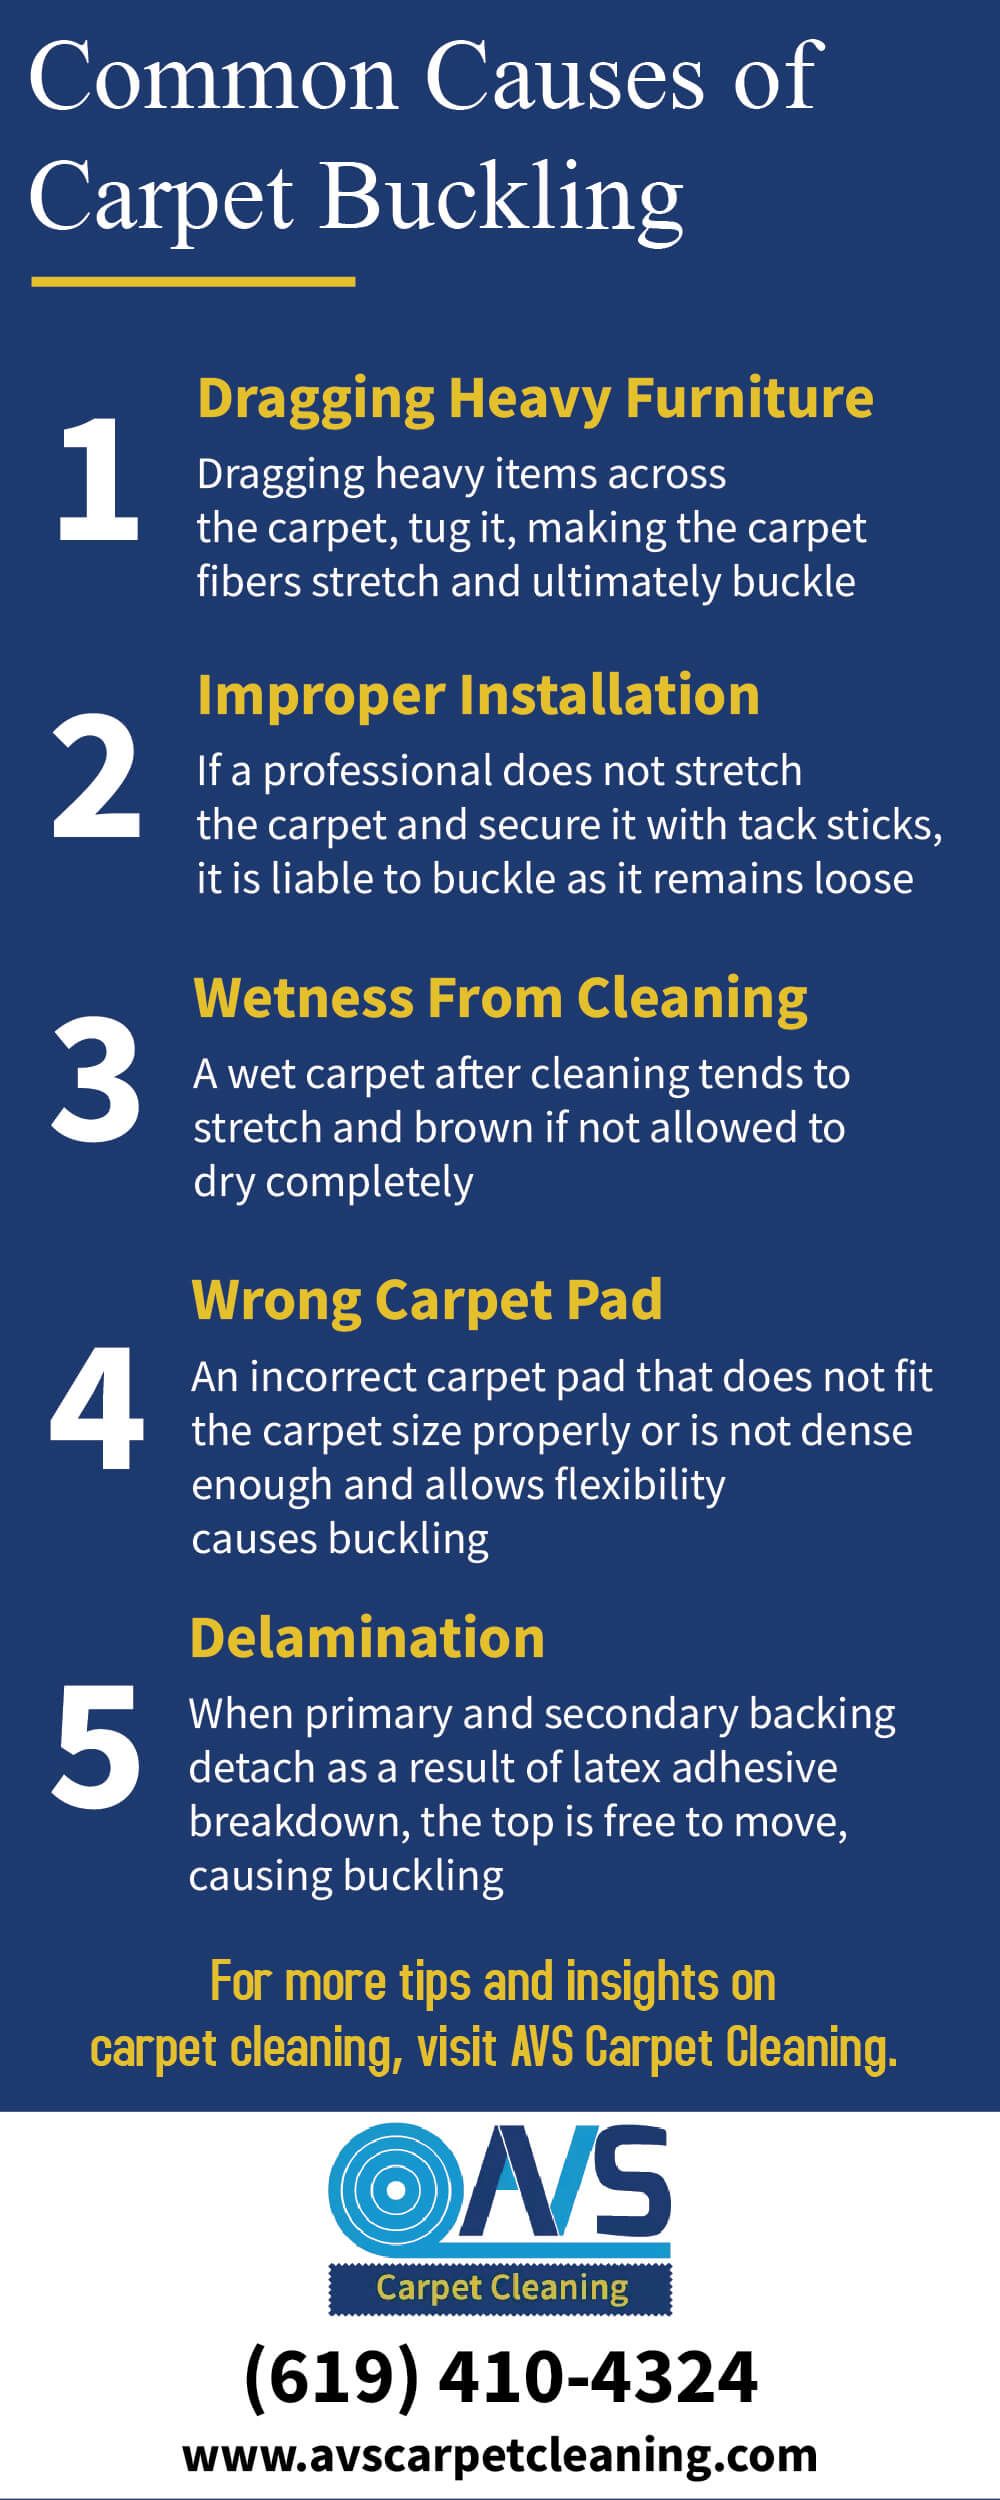 Common Causes of Carpet Buckling